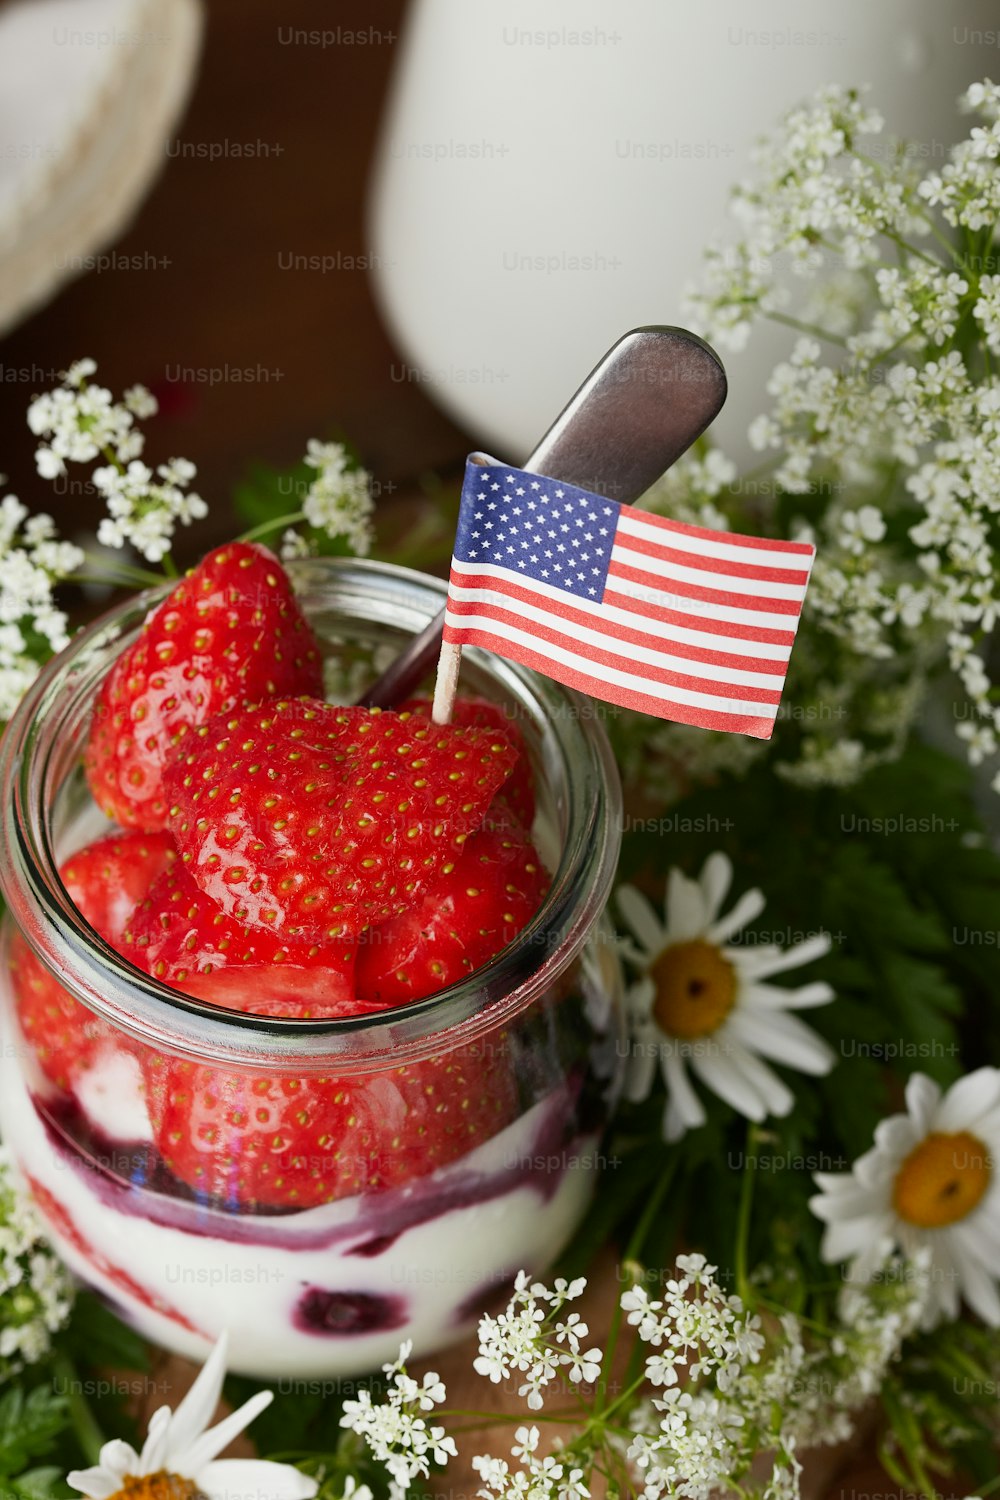 strawberries in a jar with a flag sticking out of it